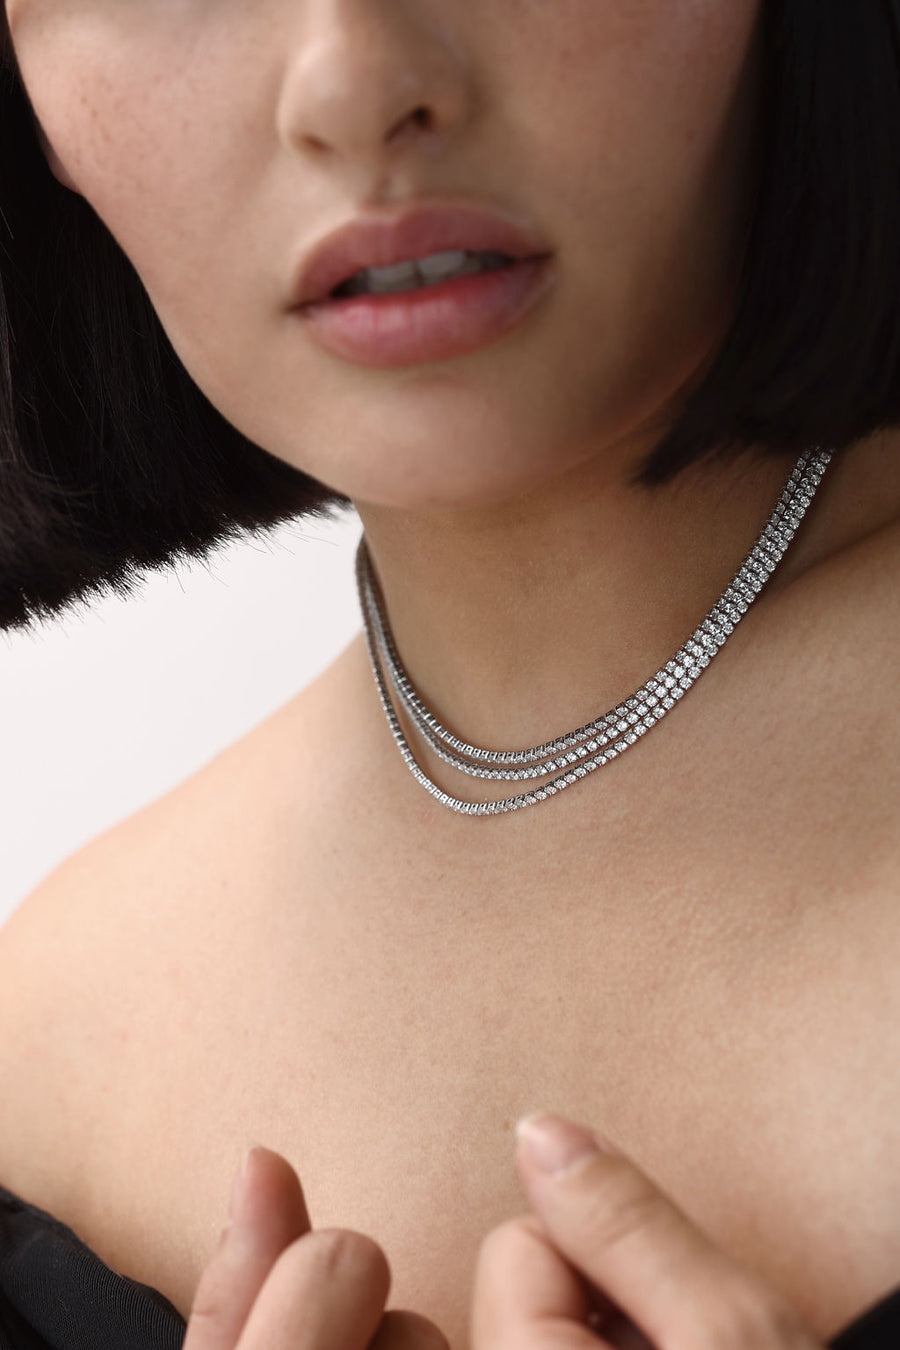 A close on of a woman's neck, as she has three tennis necklaces stacked